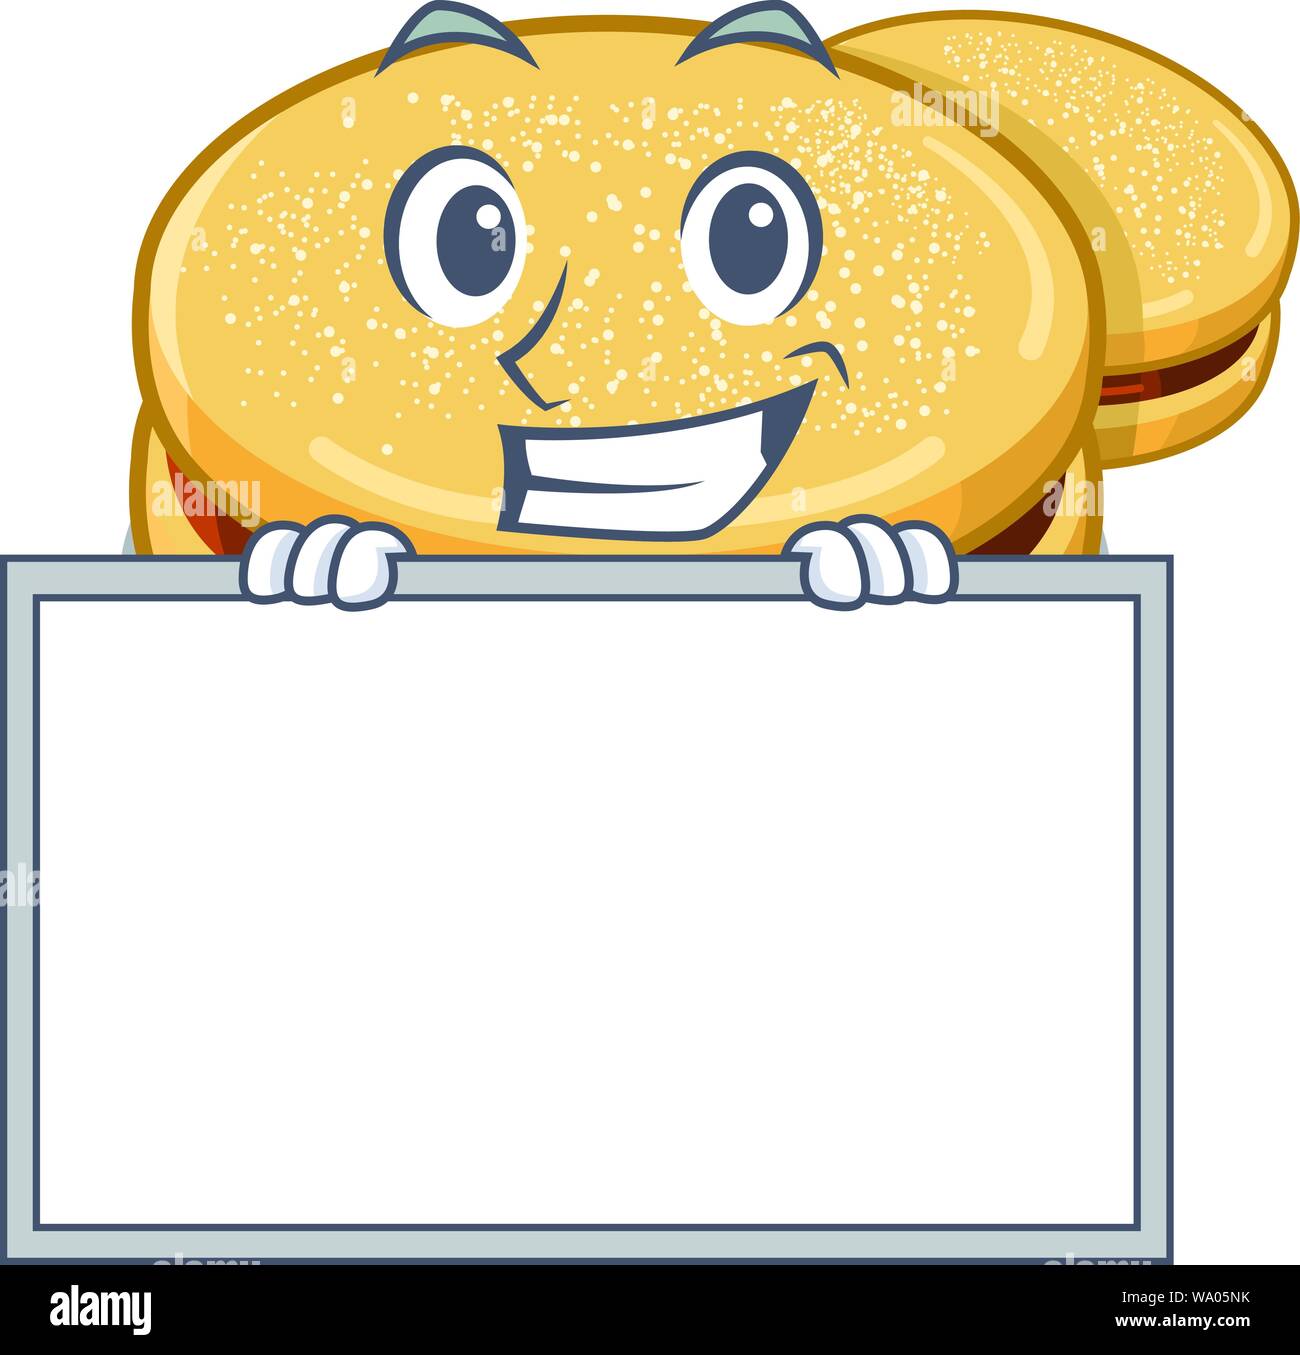 Grinning with board alfajores cartoon in the a jar Stock Vector